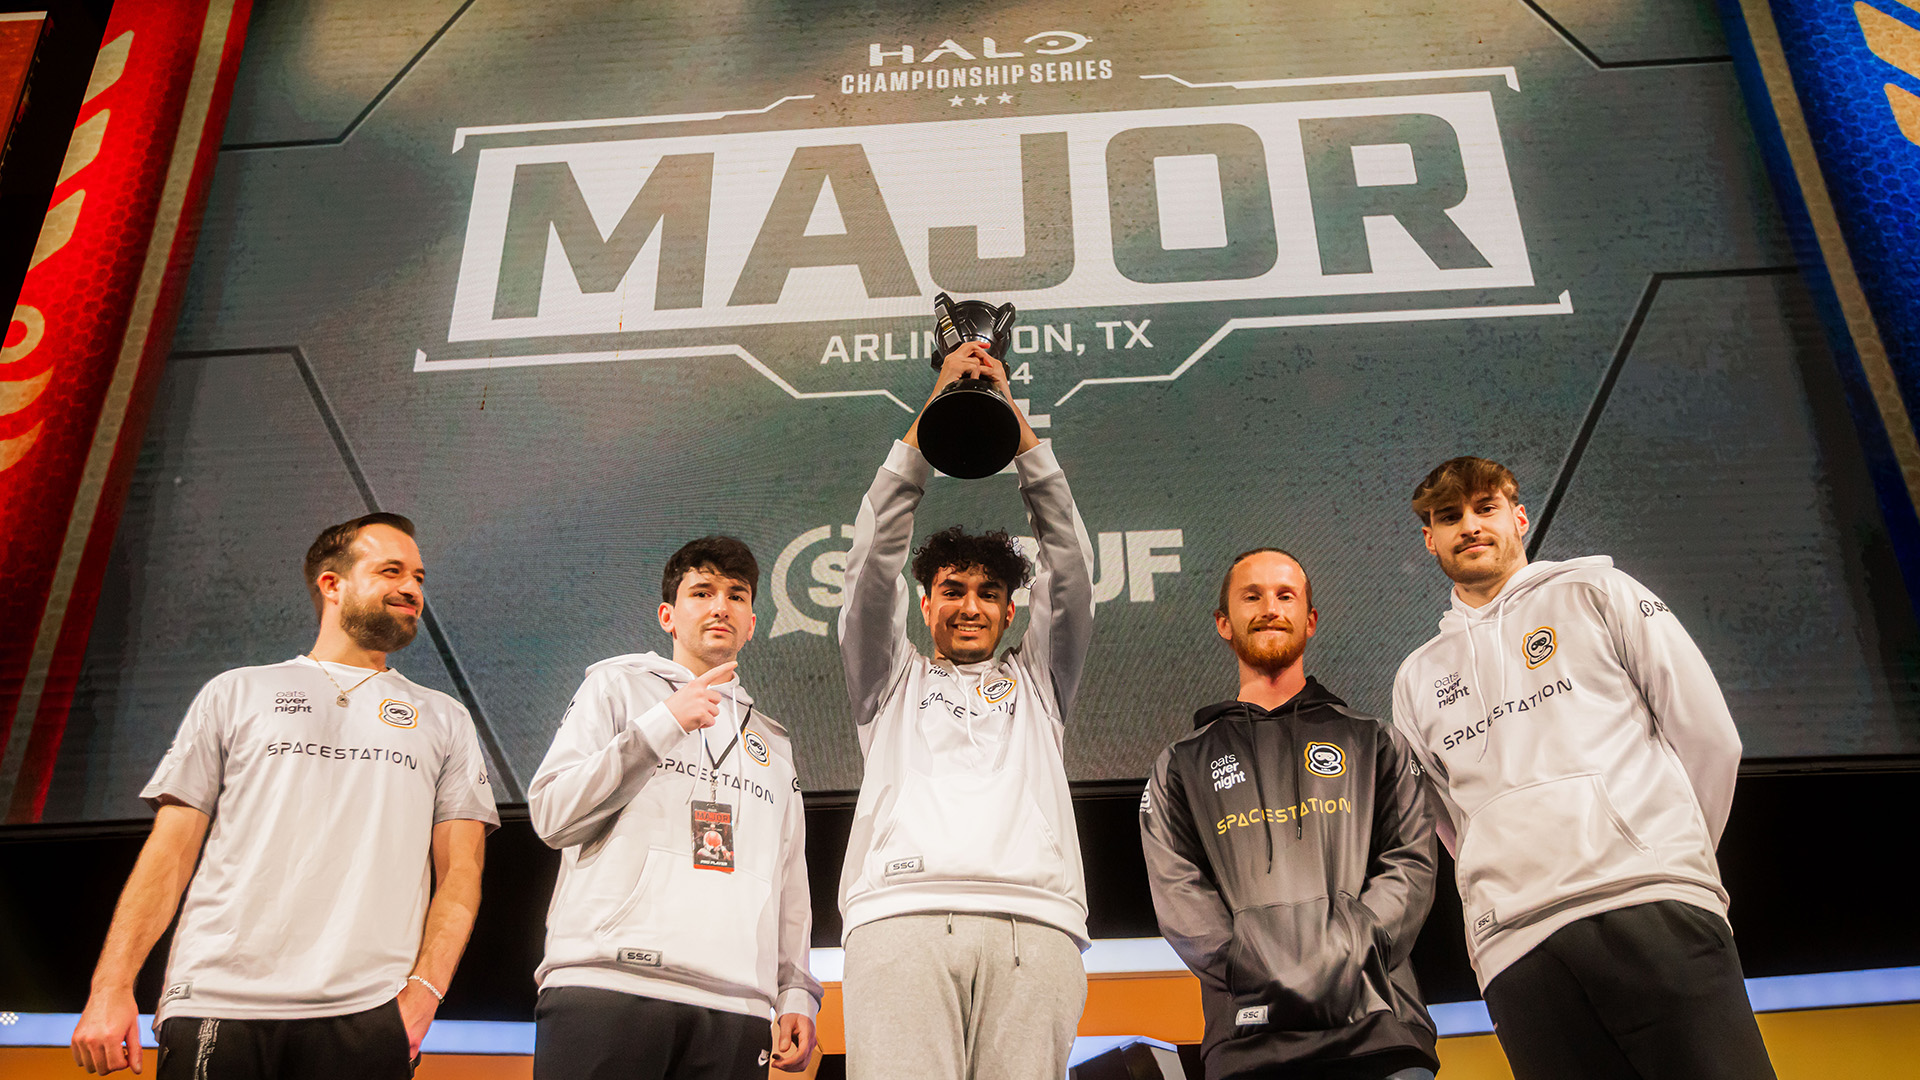 Halo Championship Series Major Arlington 2024 Champions, Spacestation Gaming, hoisting the trophy on the mainstage.